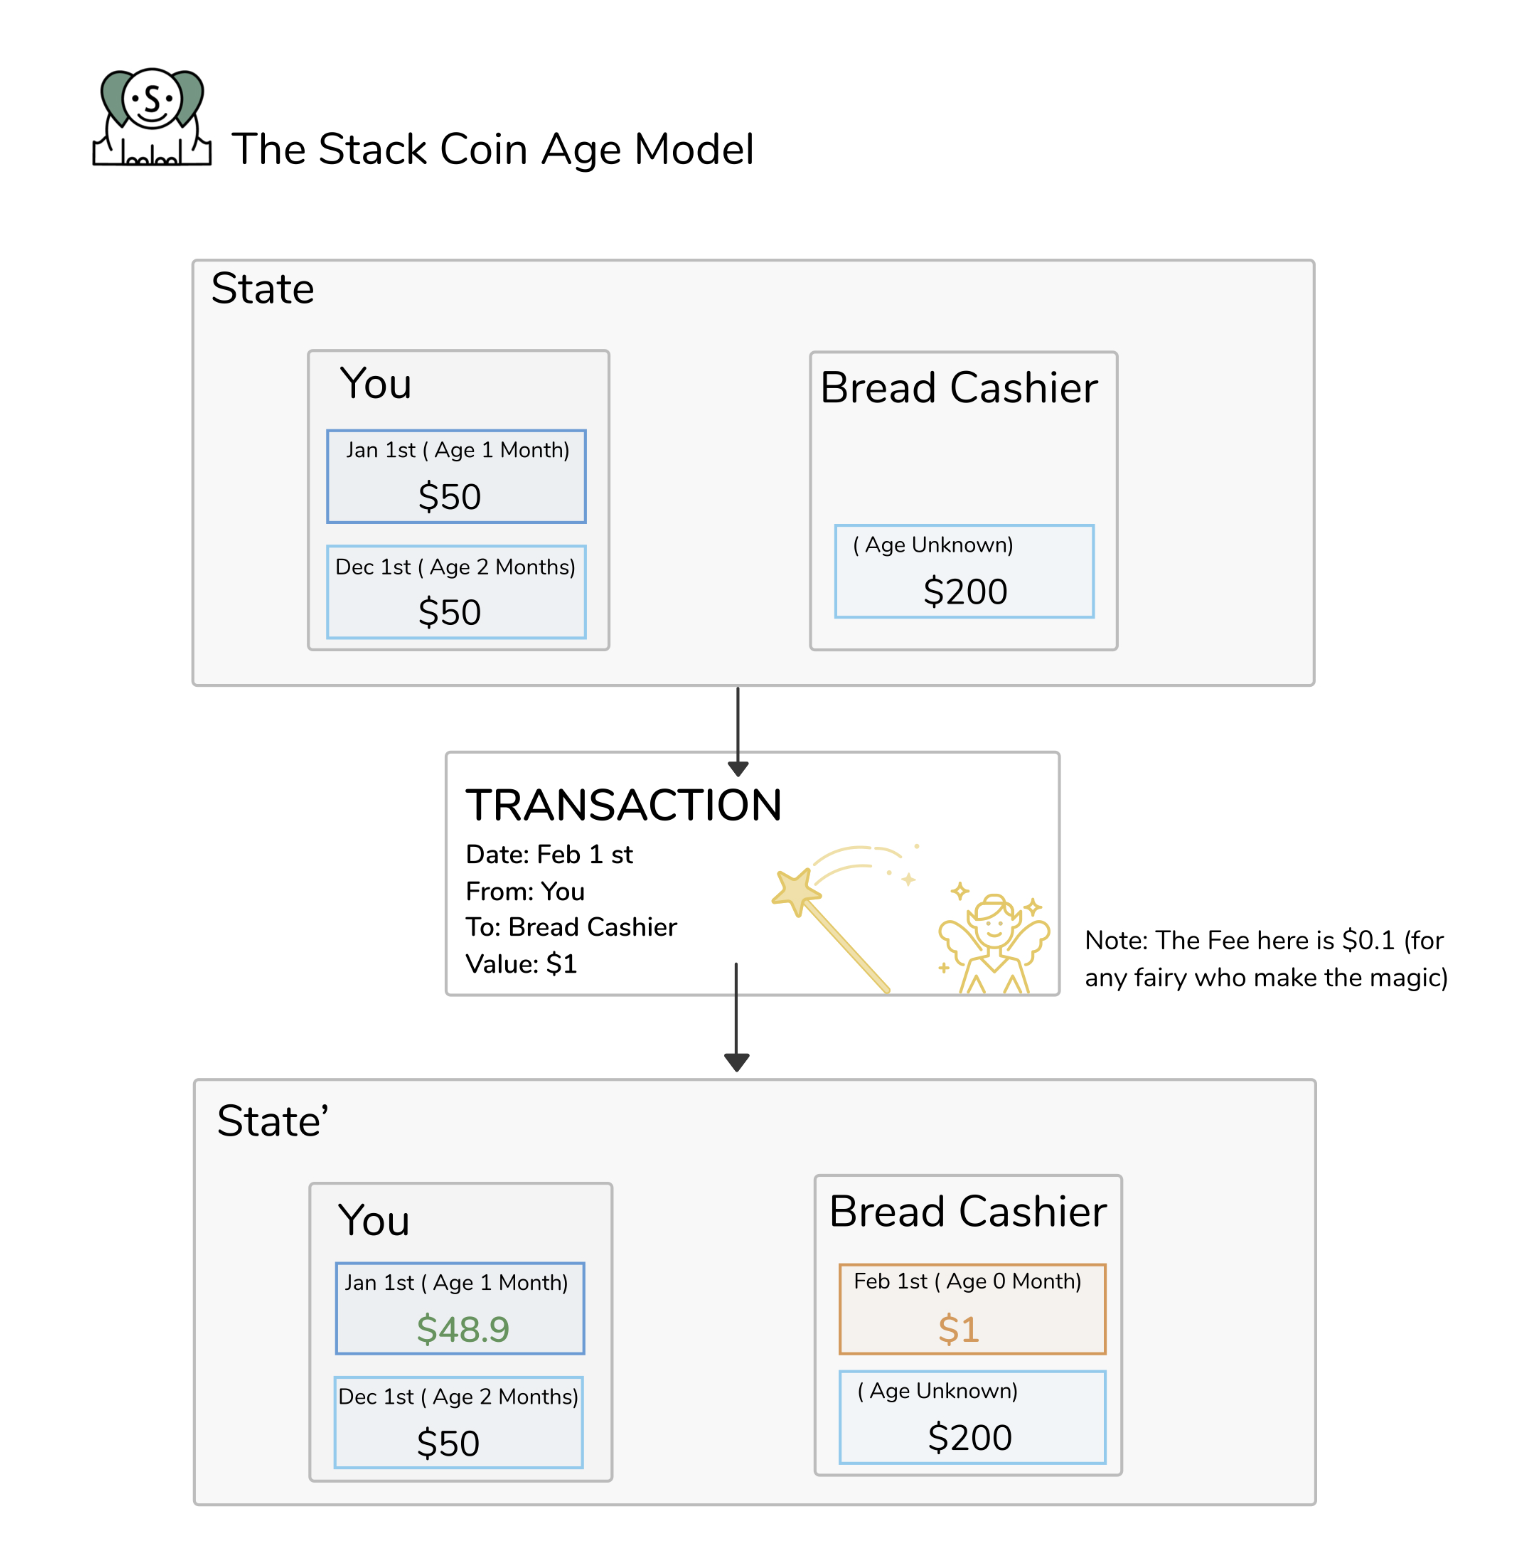 Stack coin age model